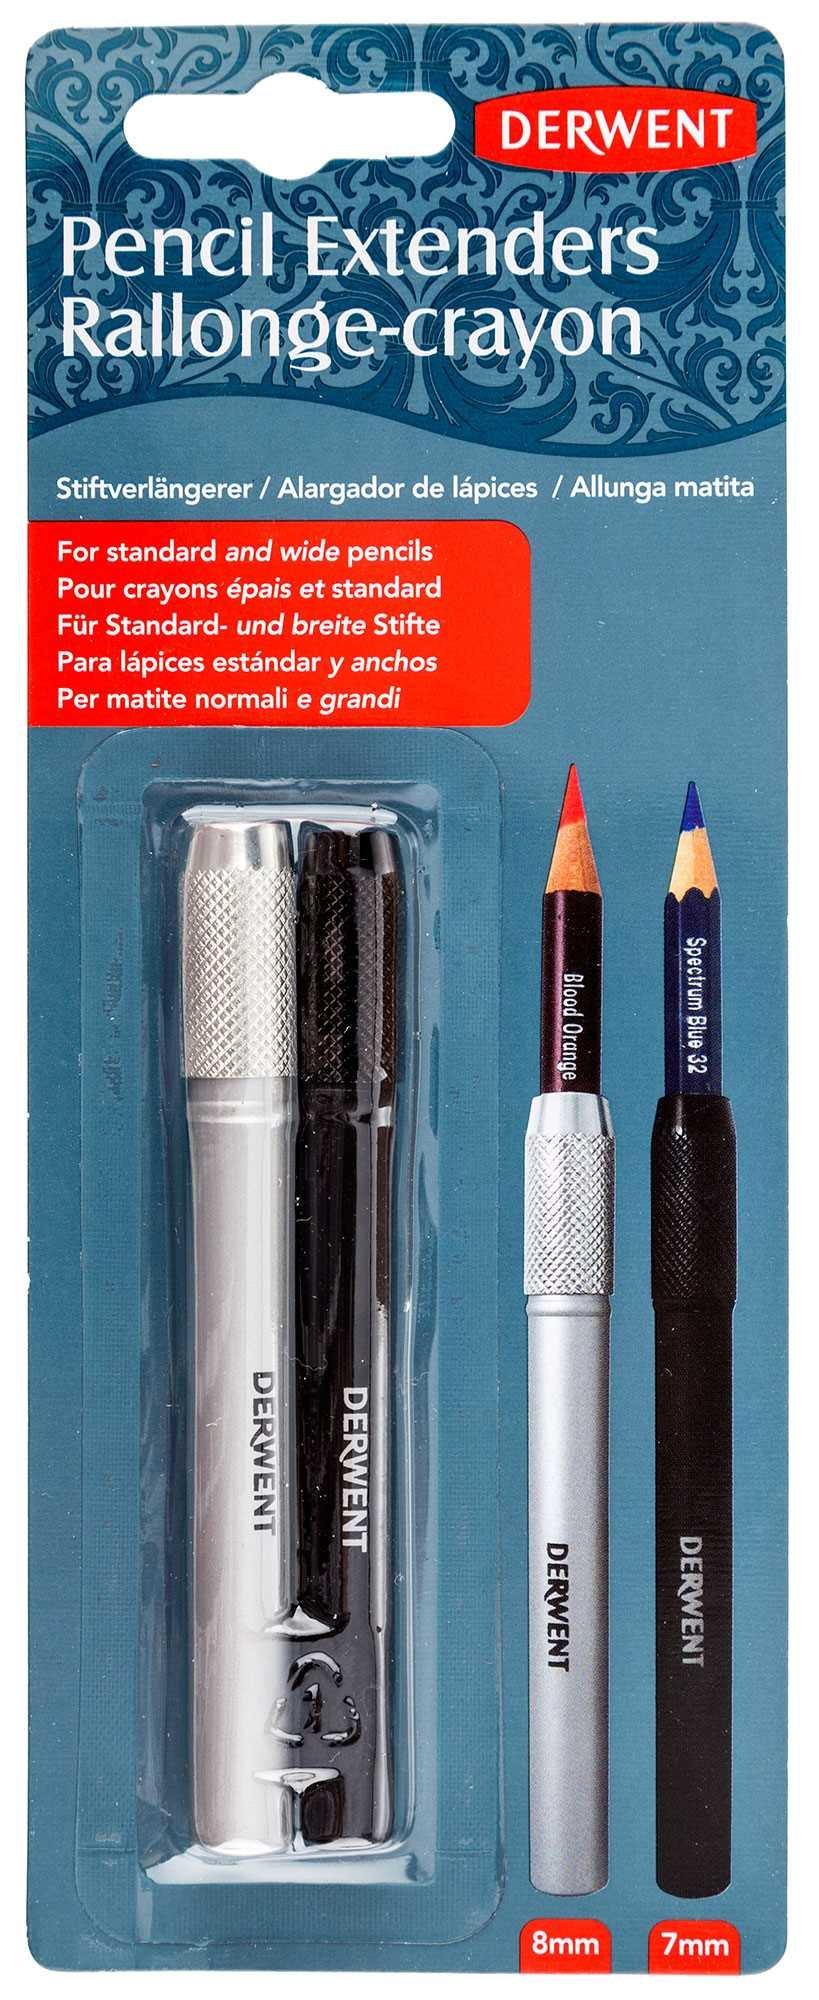 Pencil Extenders - extend the life of your pencils